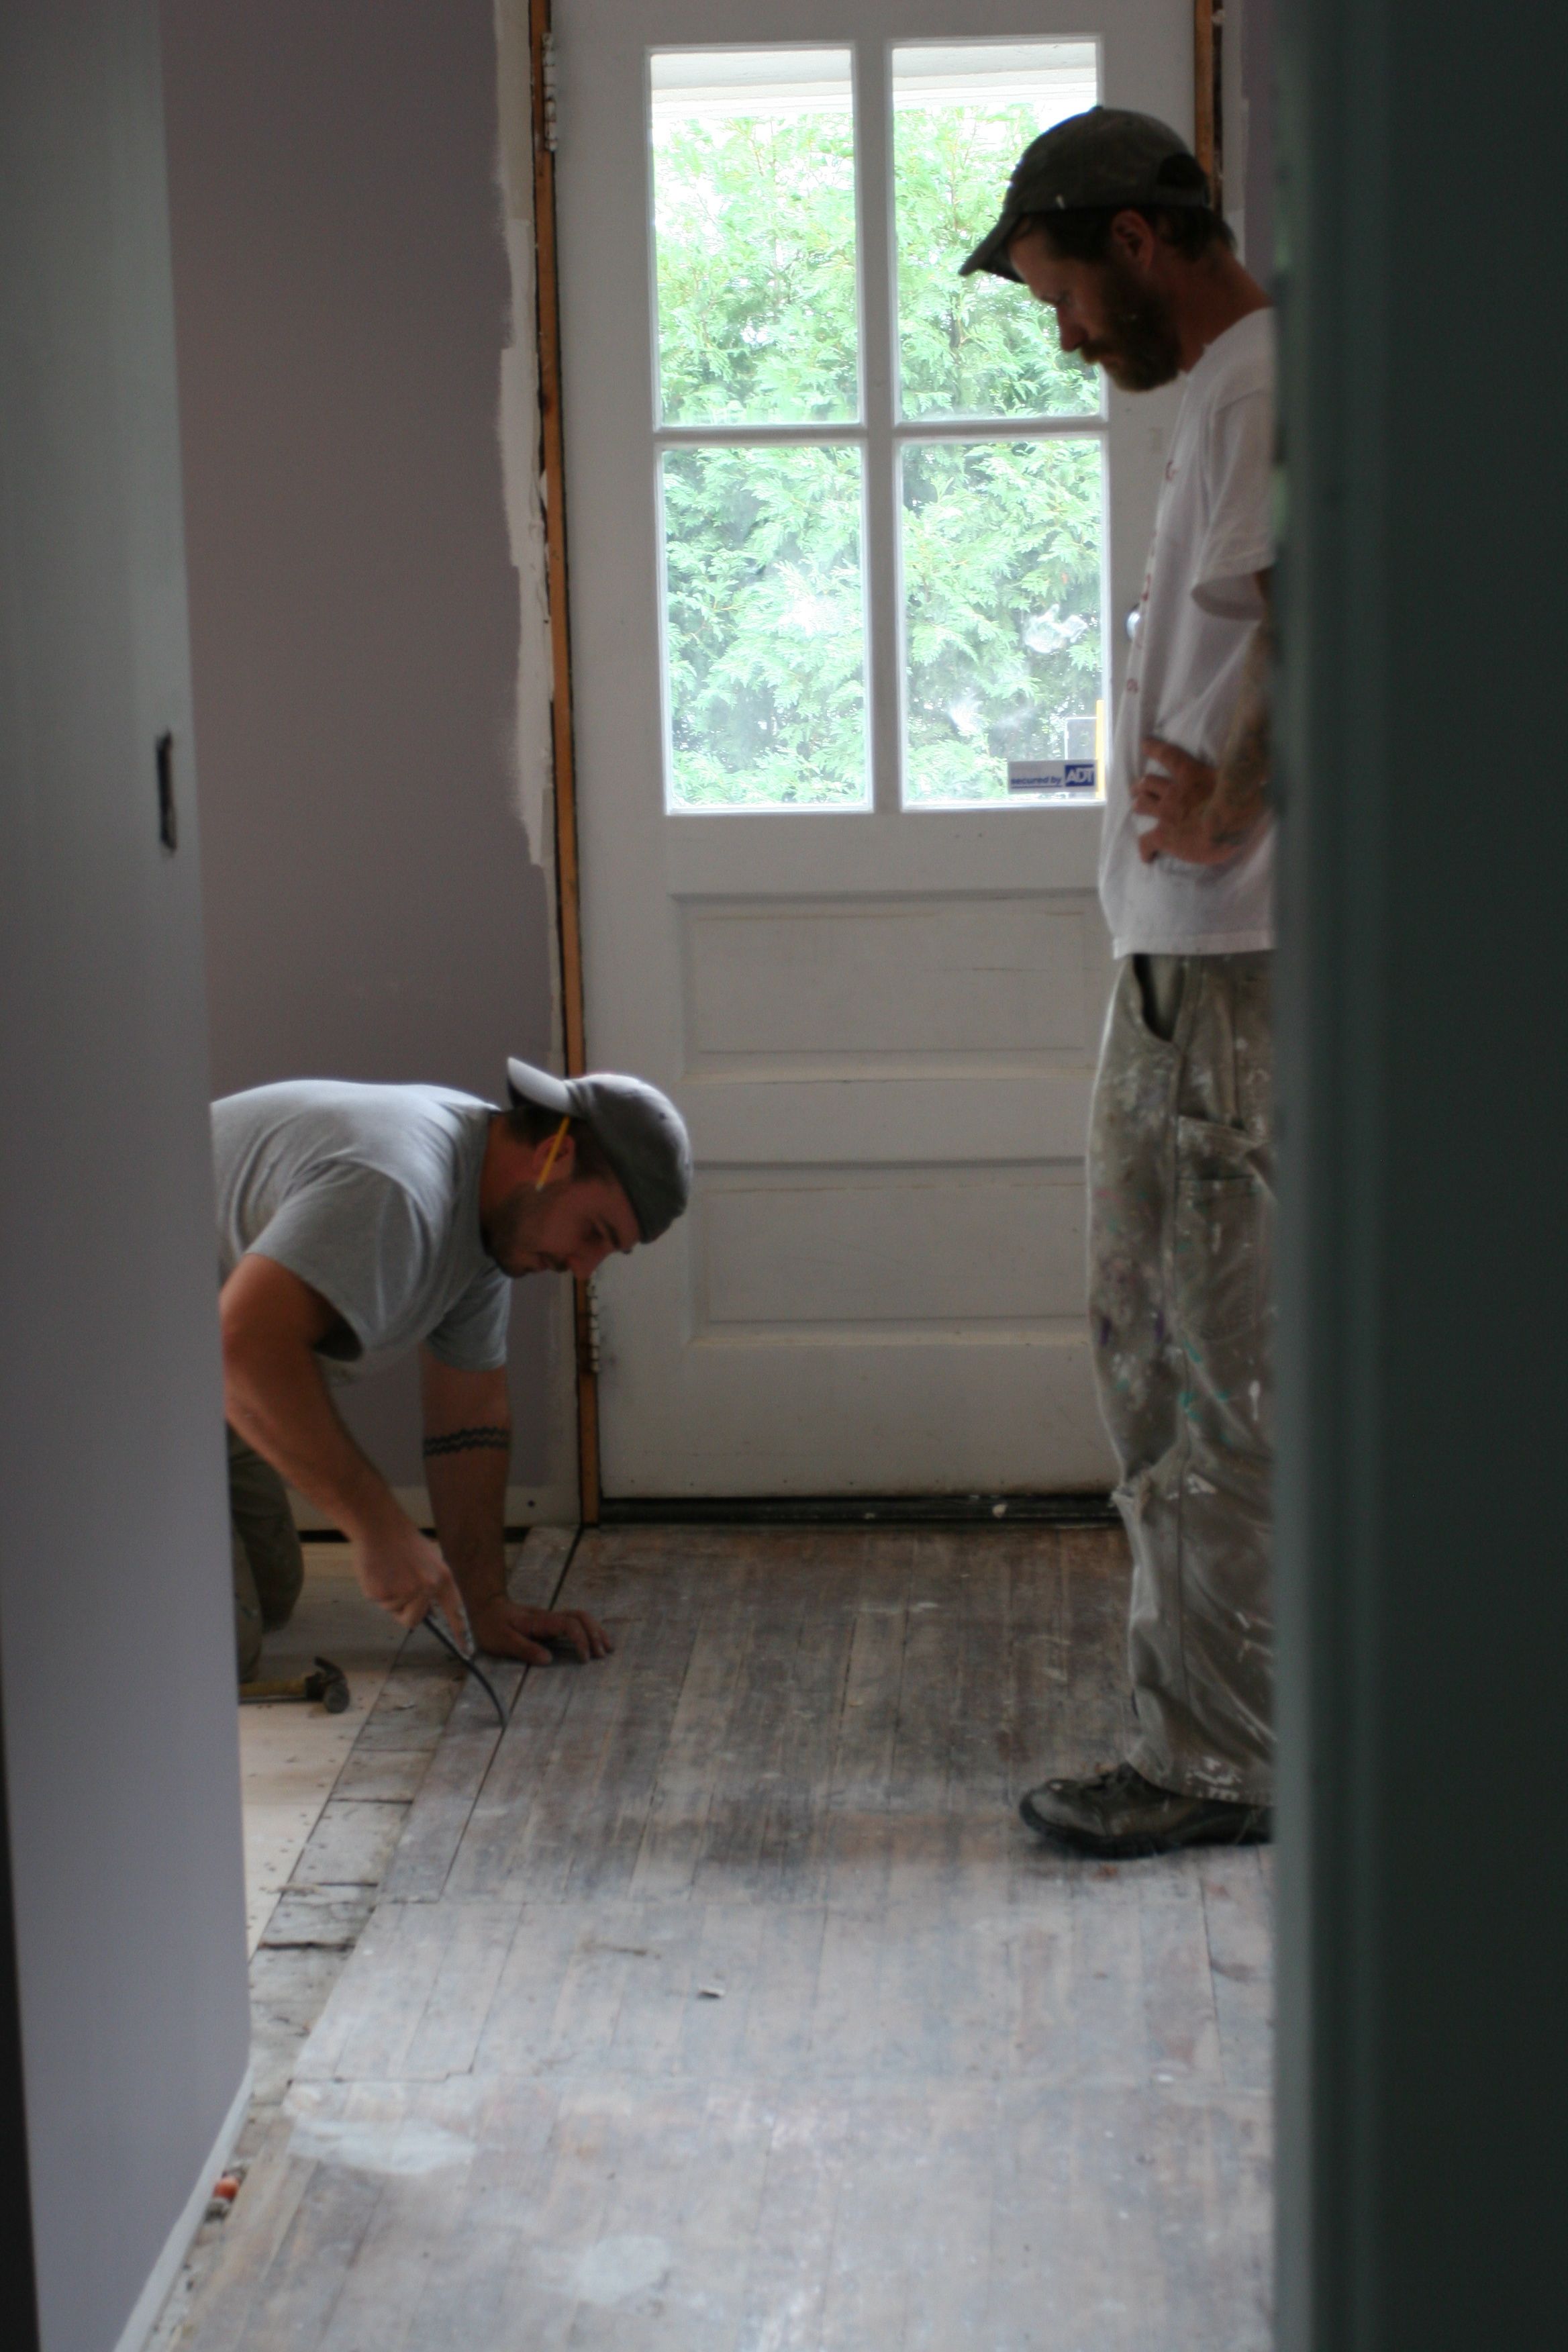 Dave gently removing the antique boards while Eric watches.